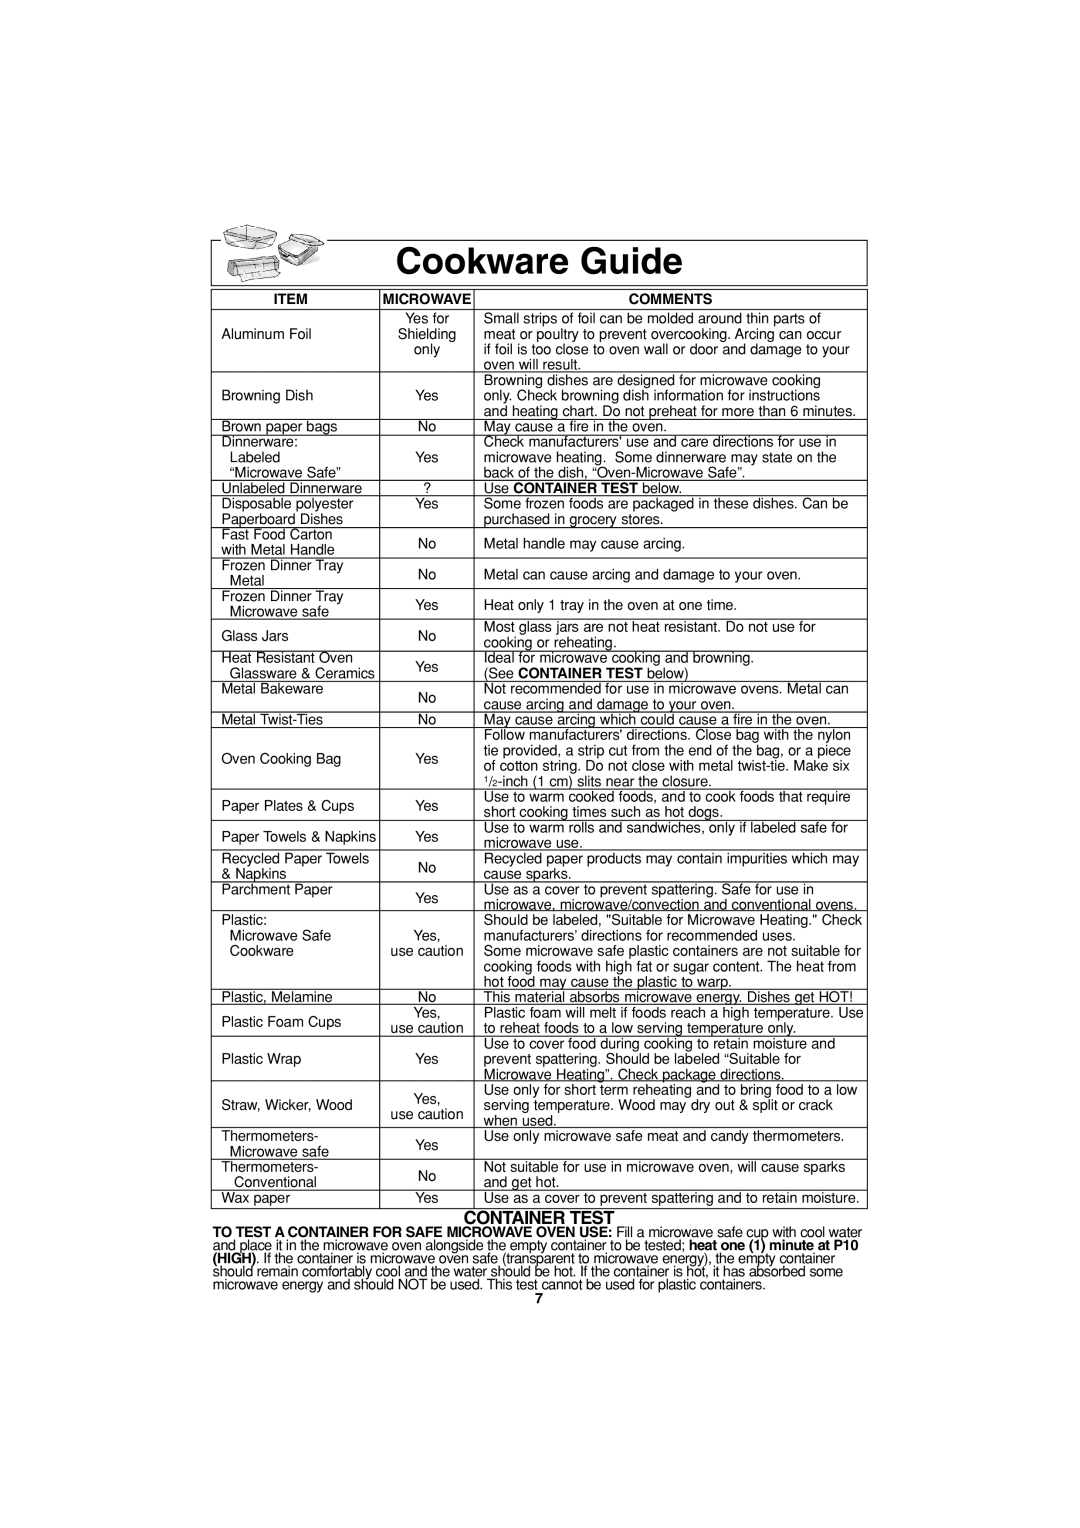 Panasonic NN-S763, NN-T763 Cookware Guide, Container Test, Comments, Use CONTAINER TEST below, See CONTAINER TEST below 